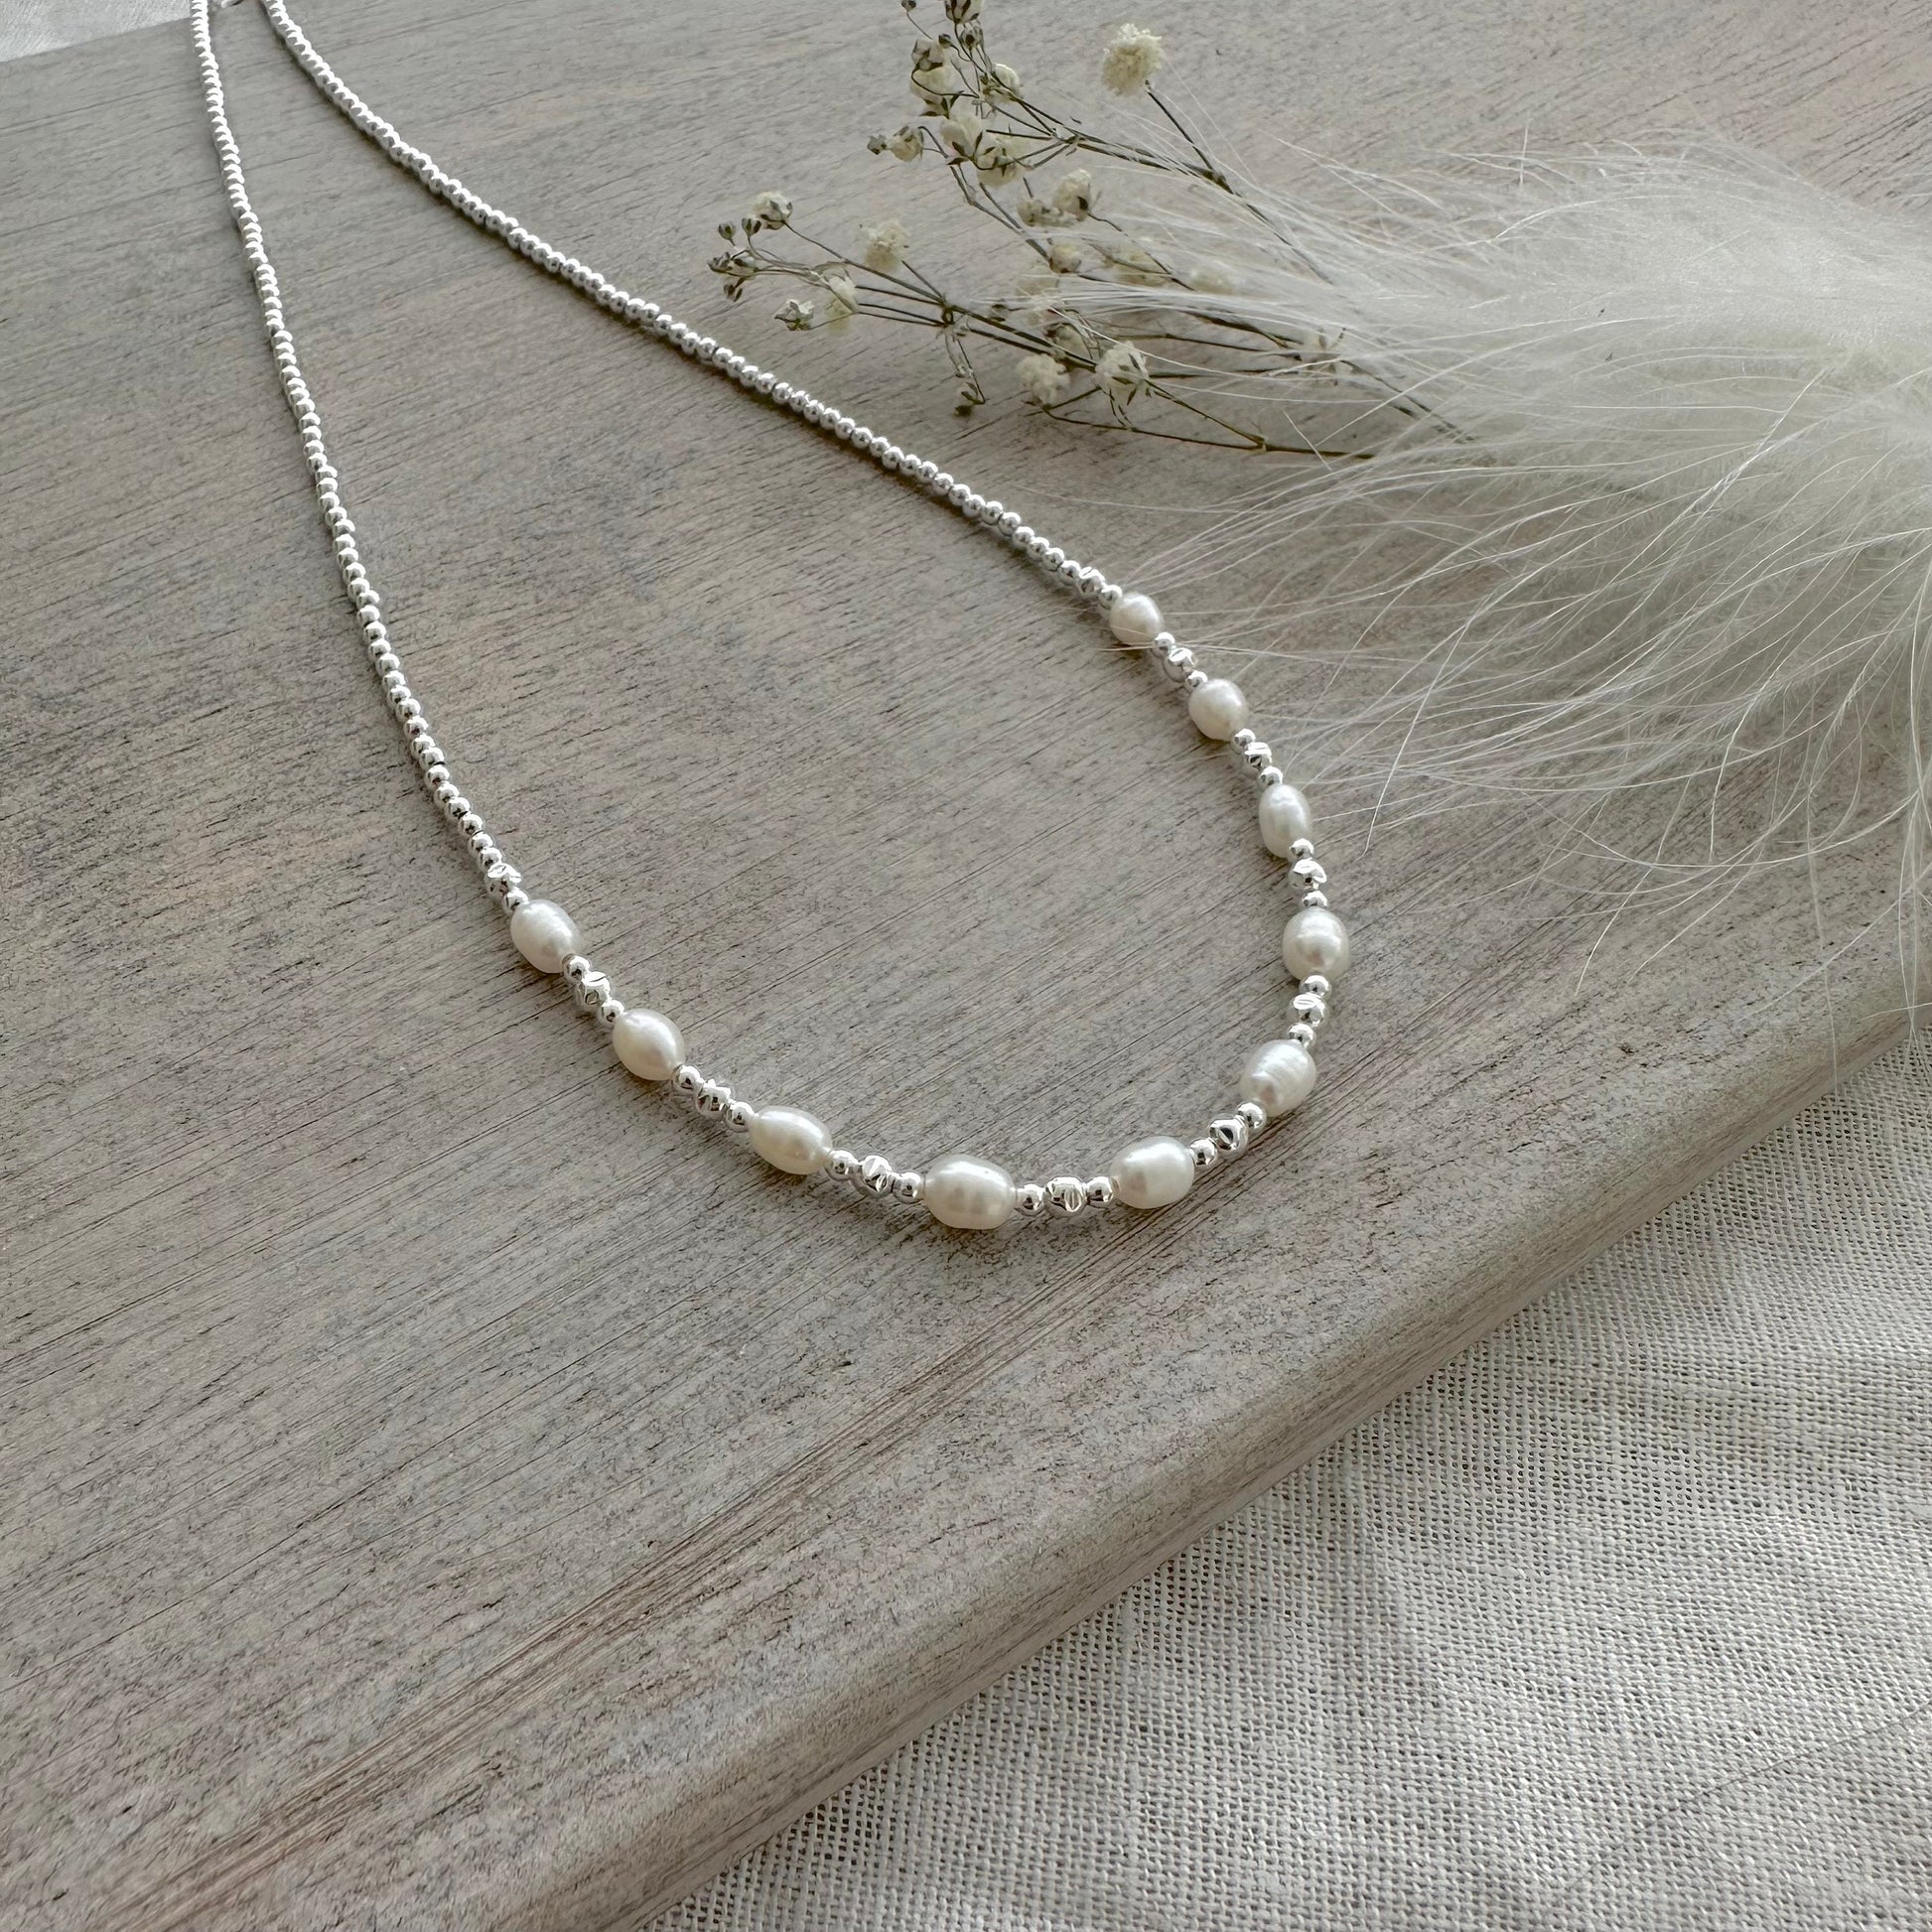 Pearl Sterling Silver Beaded Necklace, June Birthstone oval ivory pearl jewellery made to order